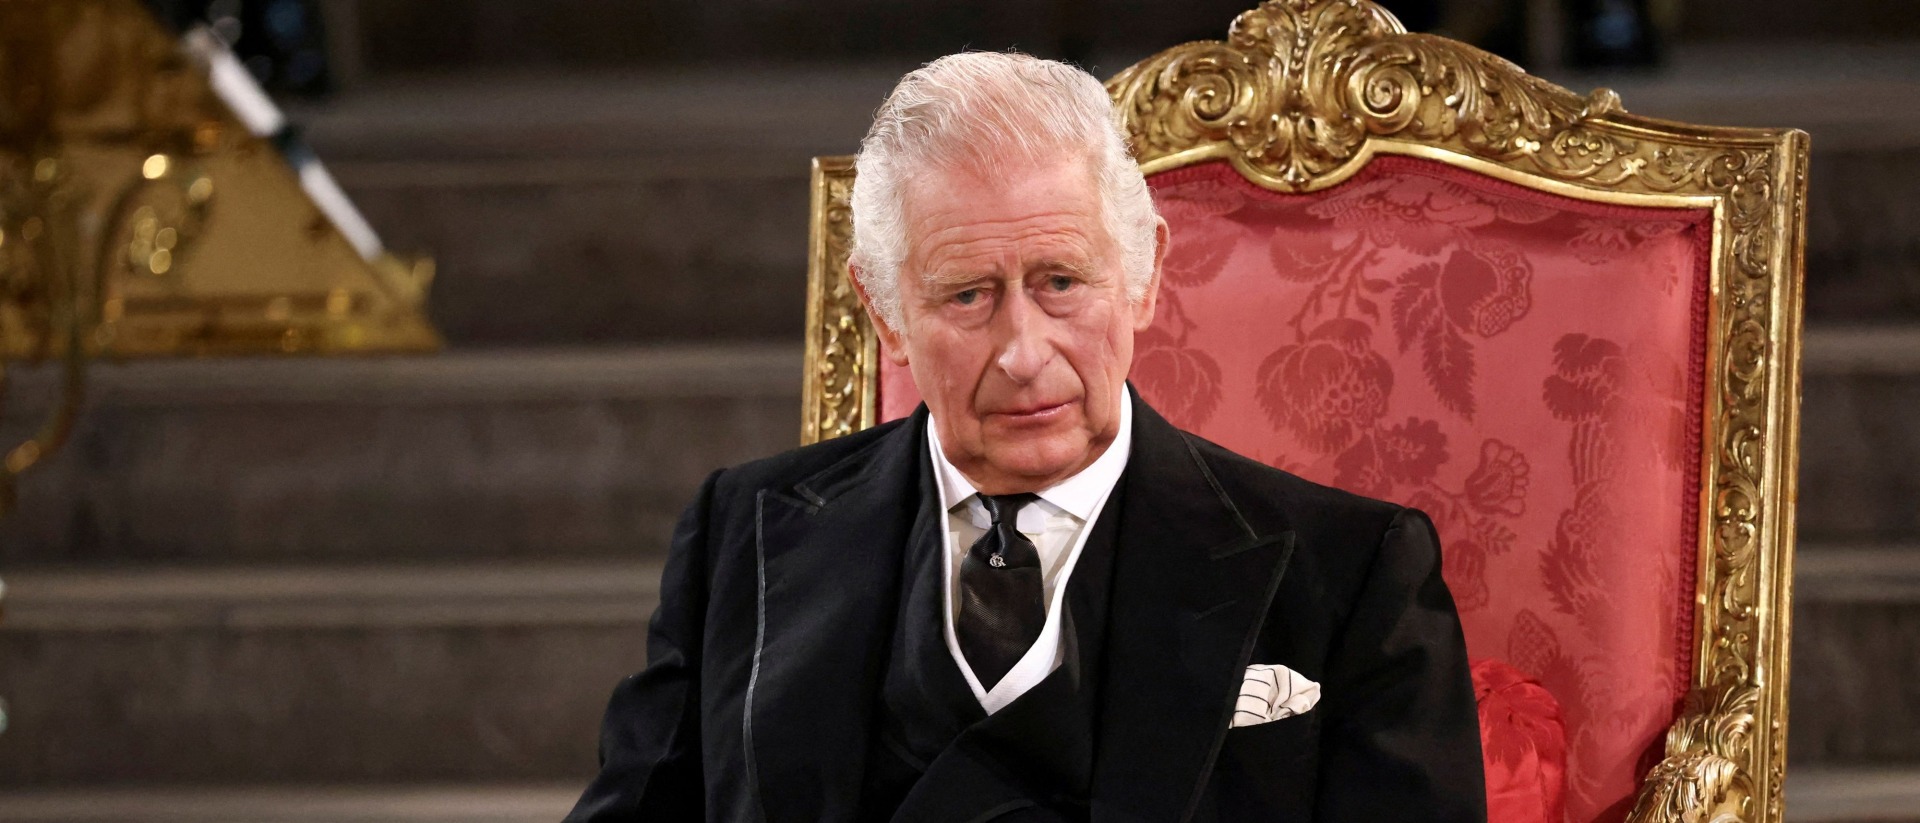 King Charles to Visit Paris, Berlin, and Hamburg in First Official Trips Abroad as Monarch